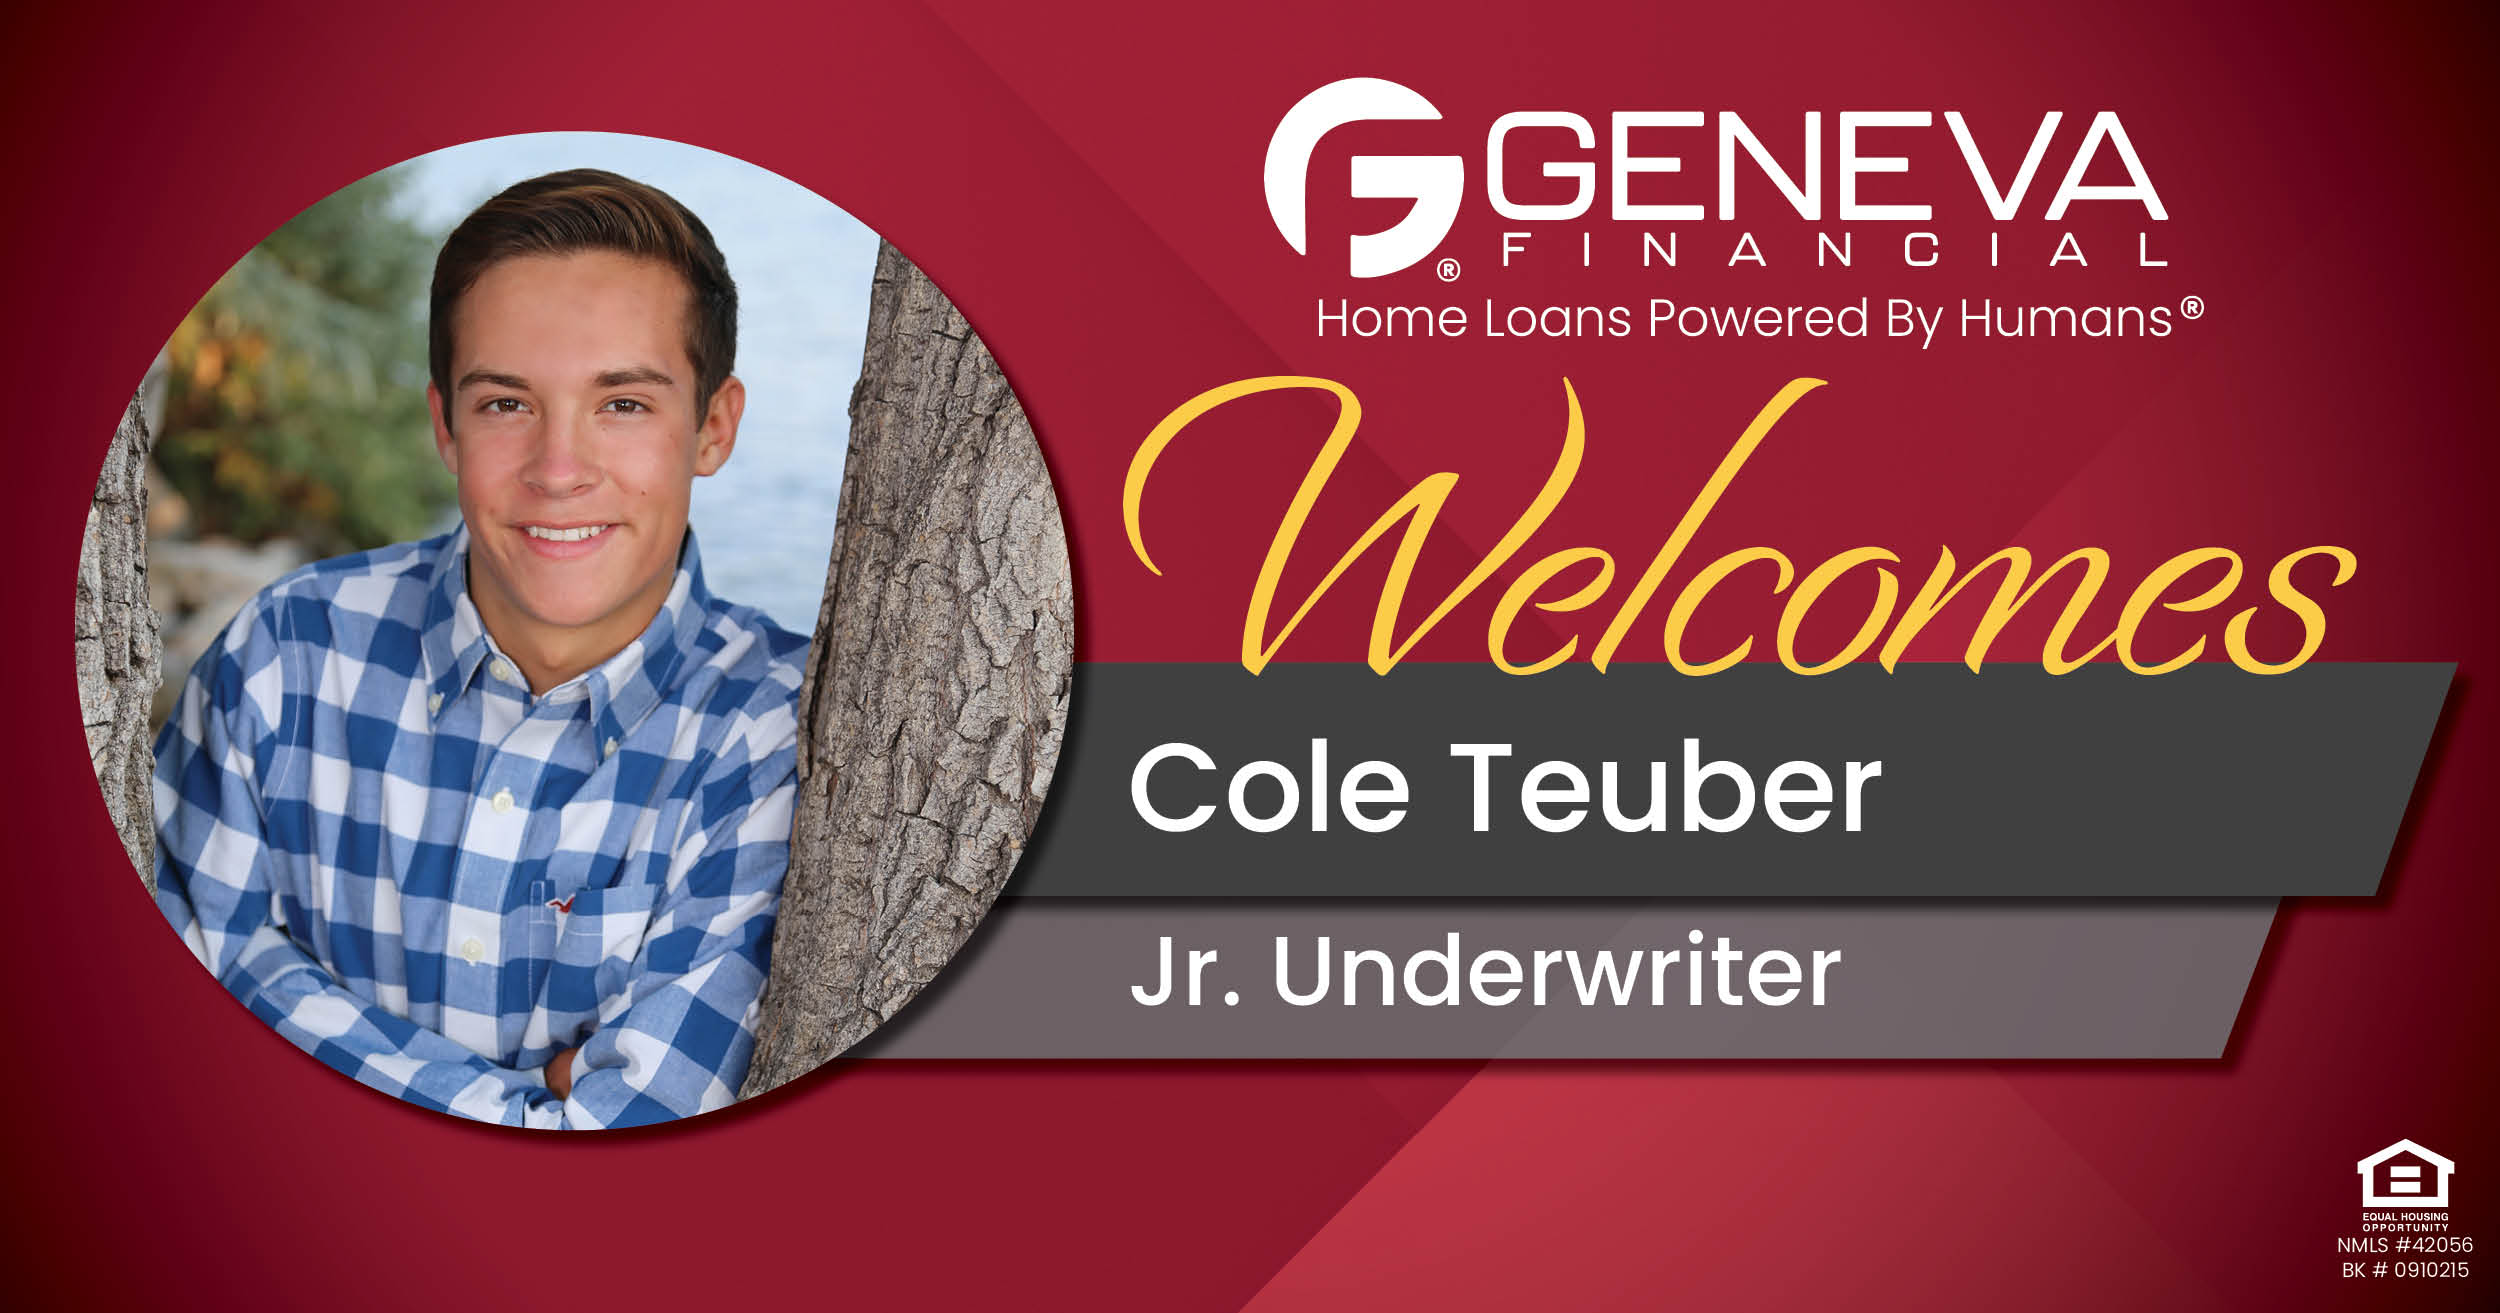 Geneva Financial Welcomes New Jr. Underwriter Cole Teuber to Geneva Corporate – Home Loans Powered by Humans®.